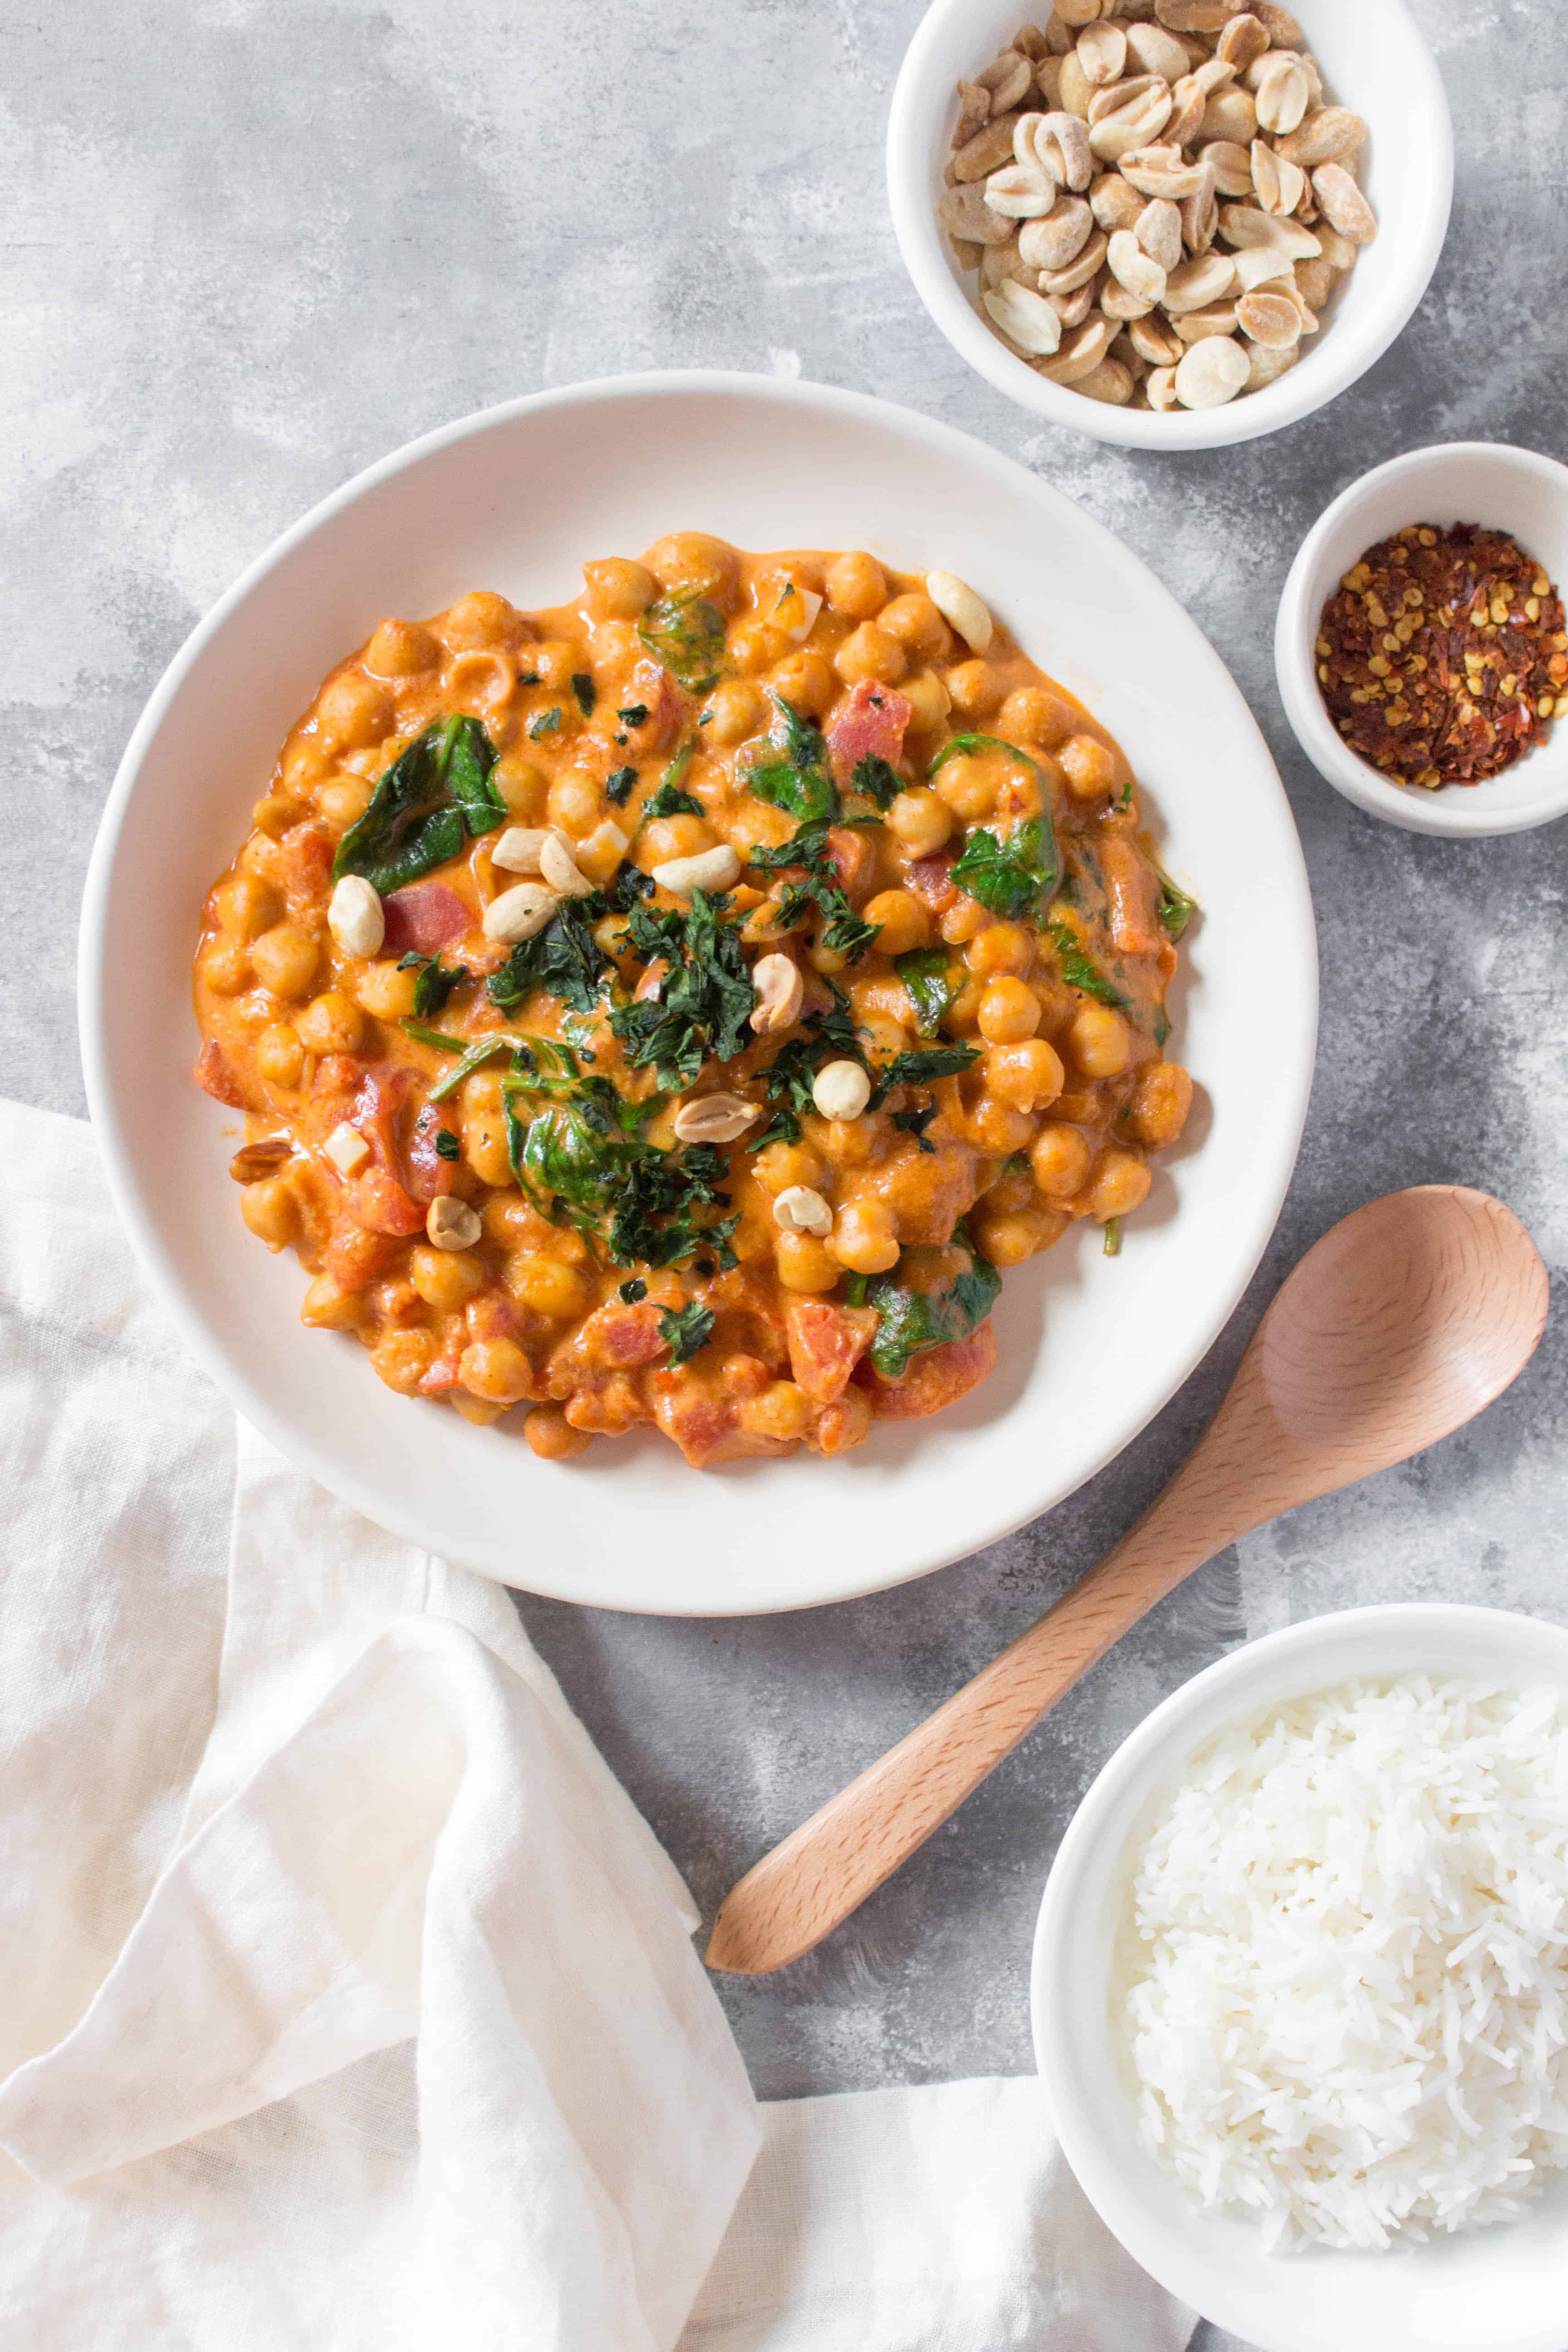 Looking for something to warm you inside and out made with a budget friendly superfood? Try this Spicy Peanut Chickpea Curry!